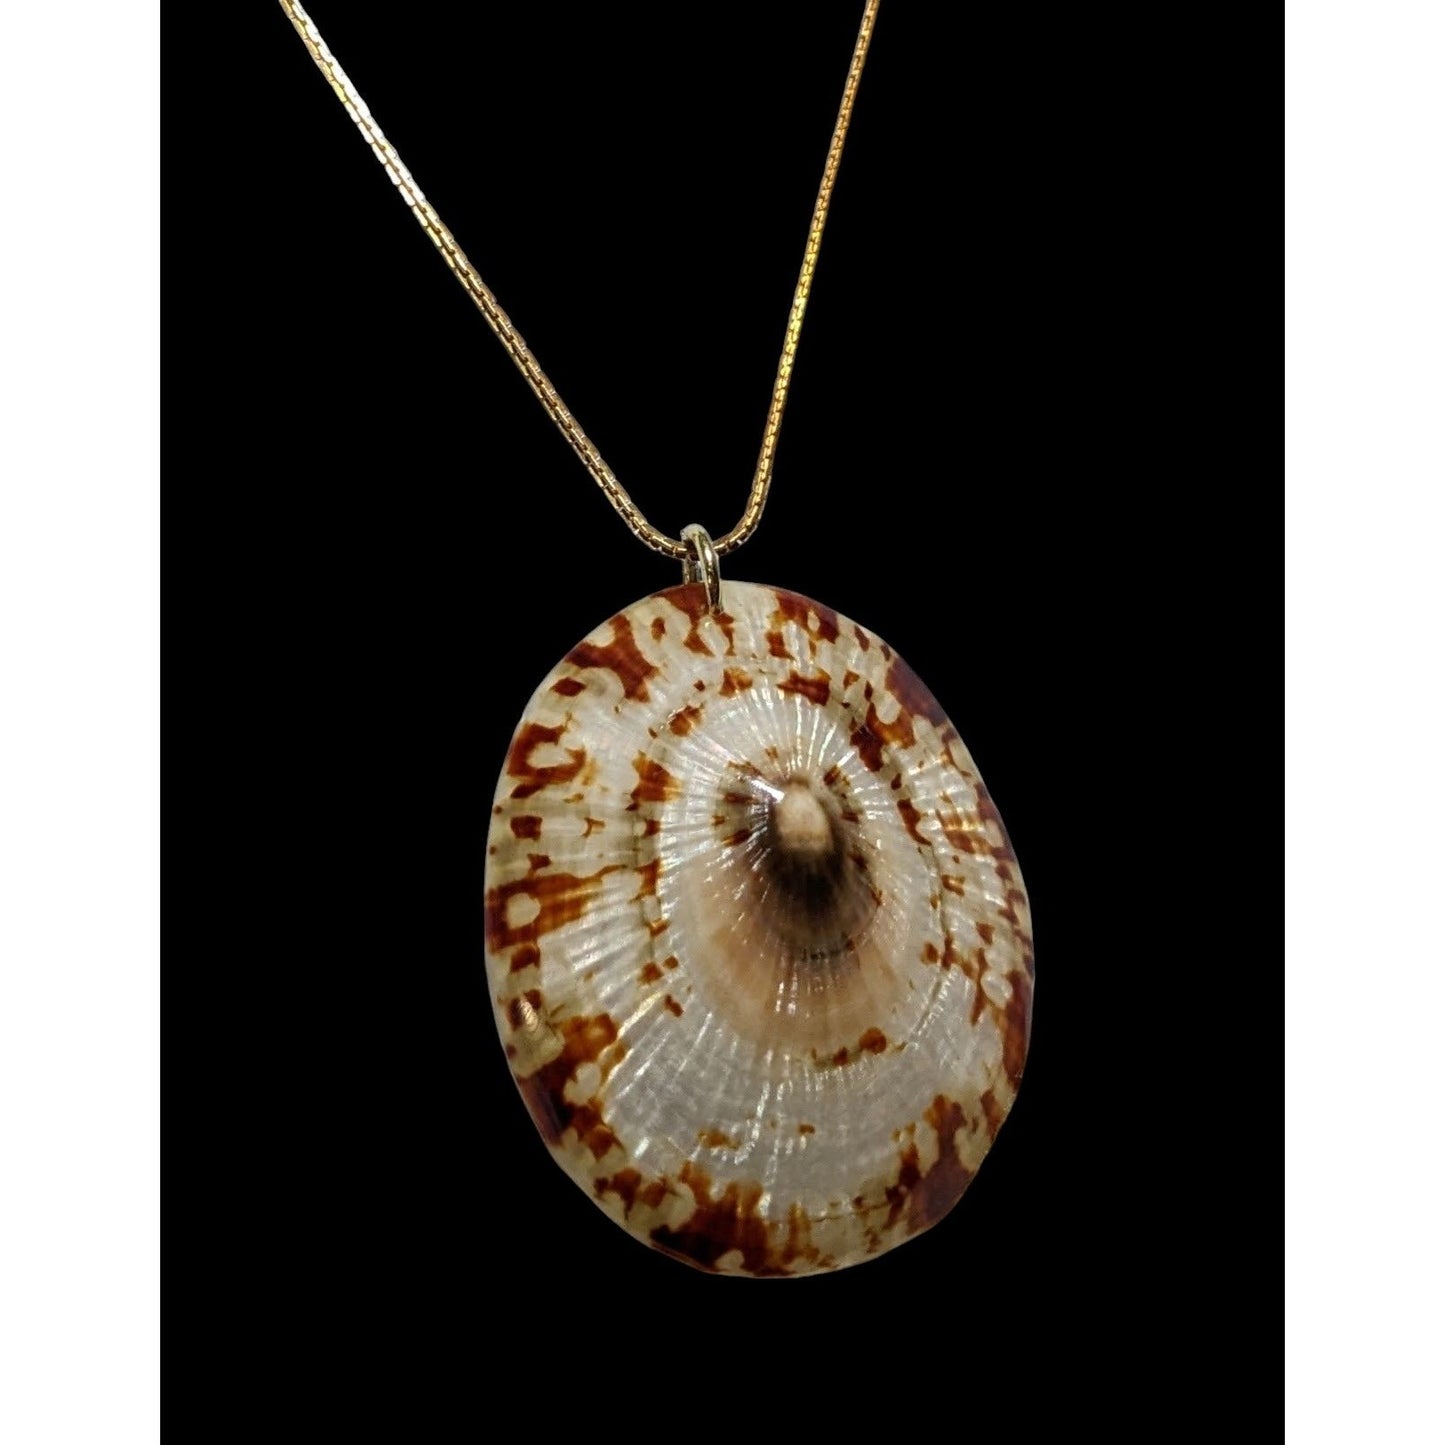 Limpet Shell Pendant Necklace